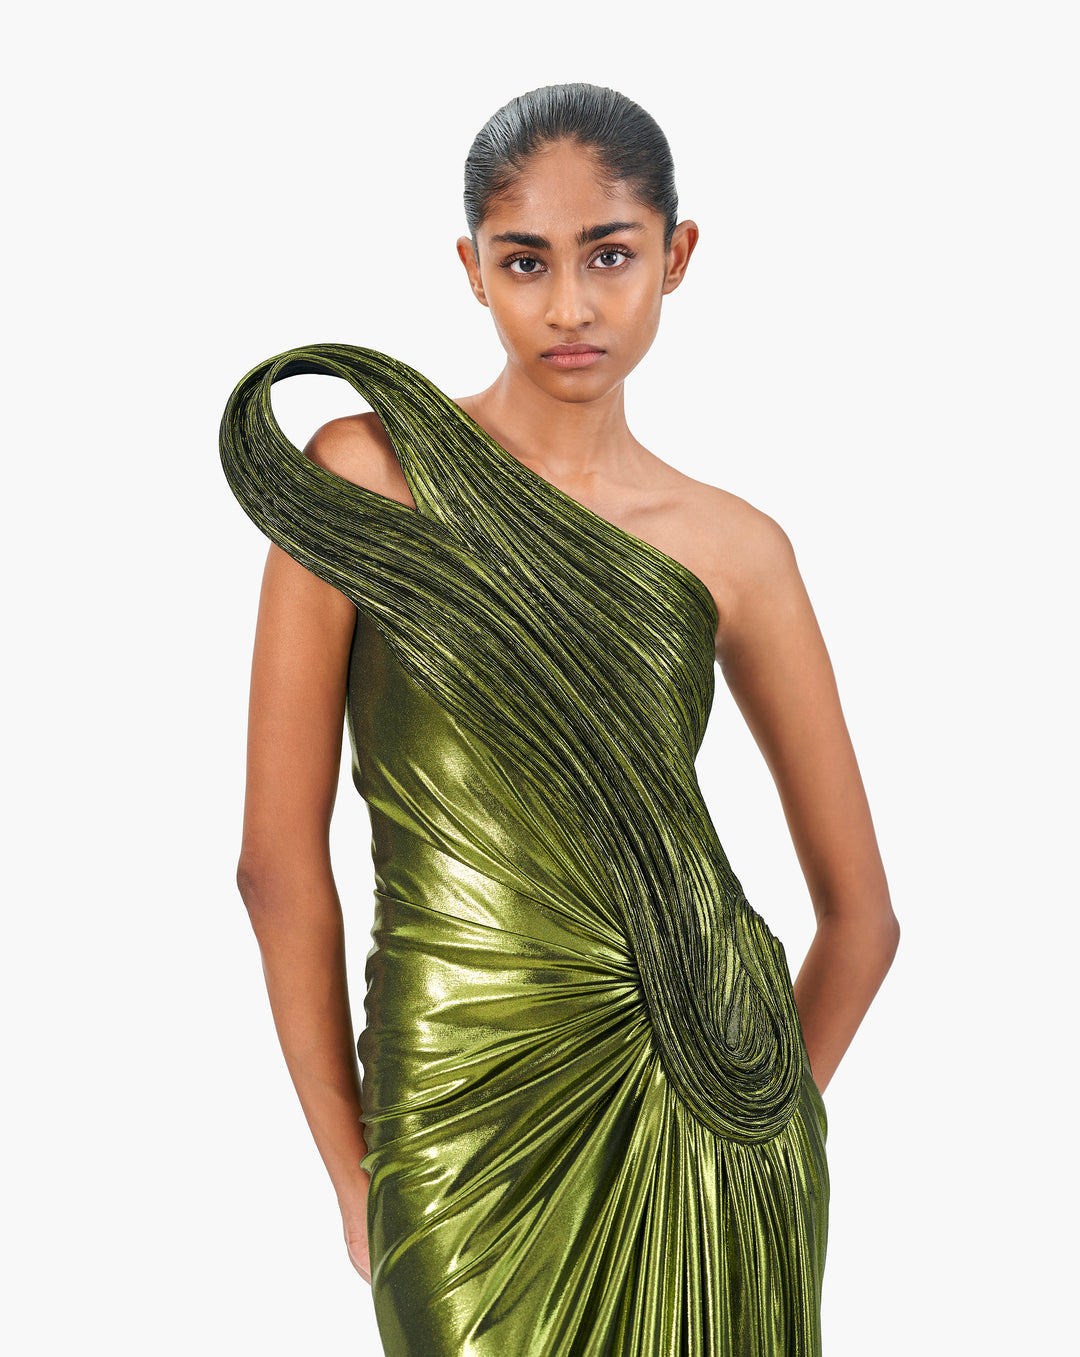 The Infinite Sculpted Shoulder Draped Gown